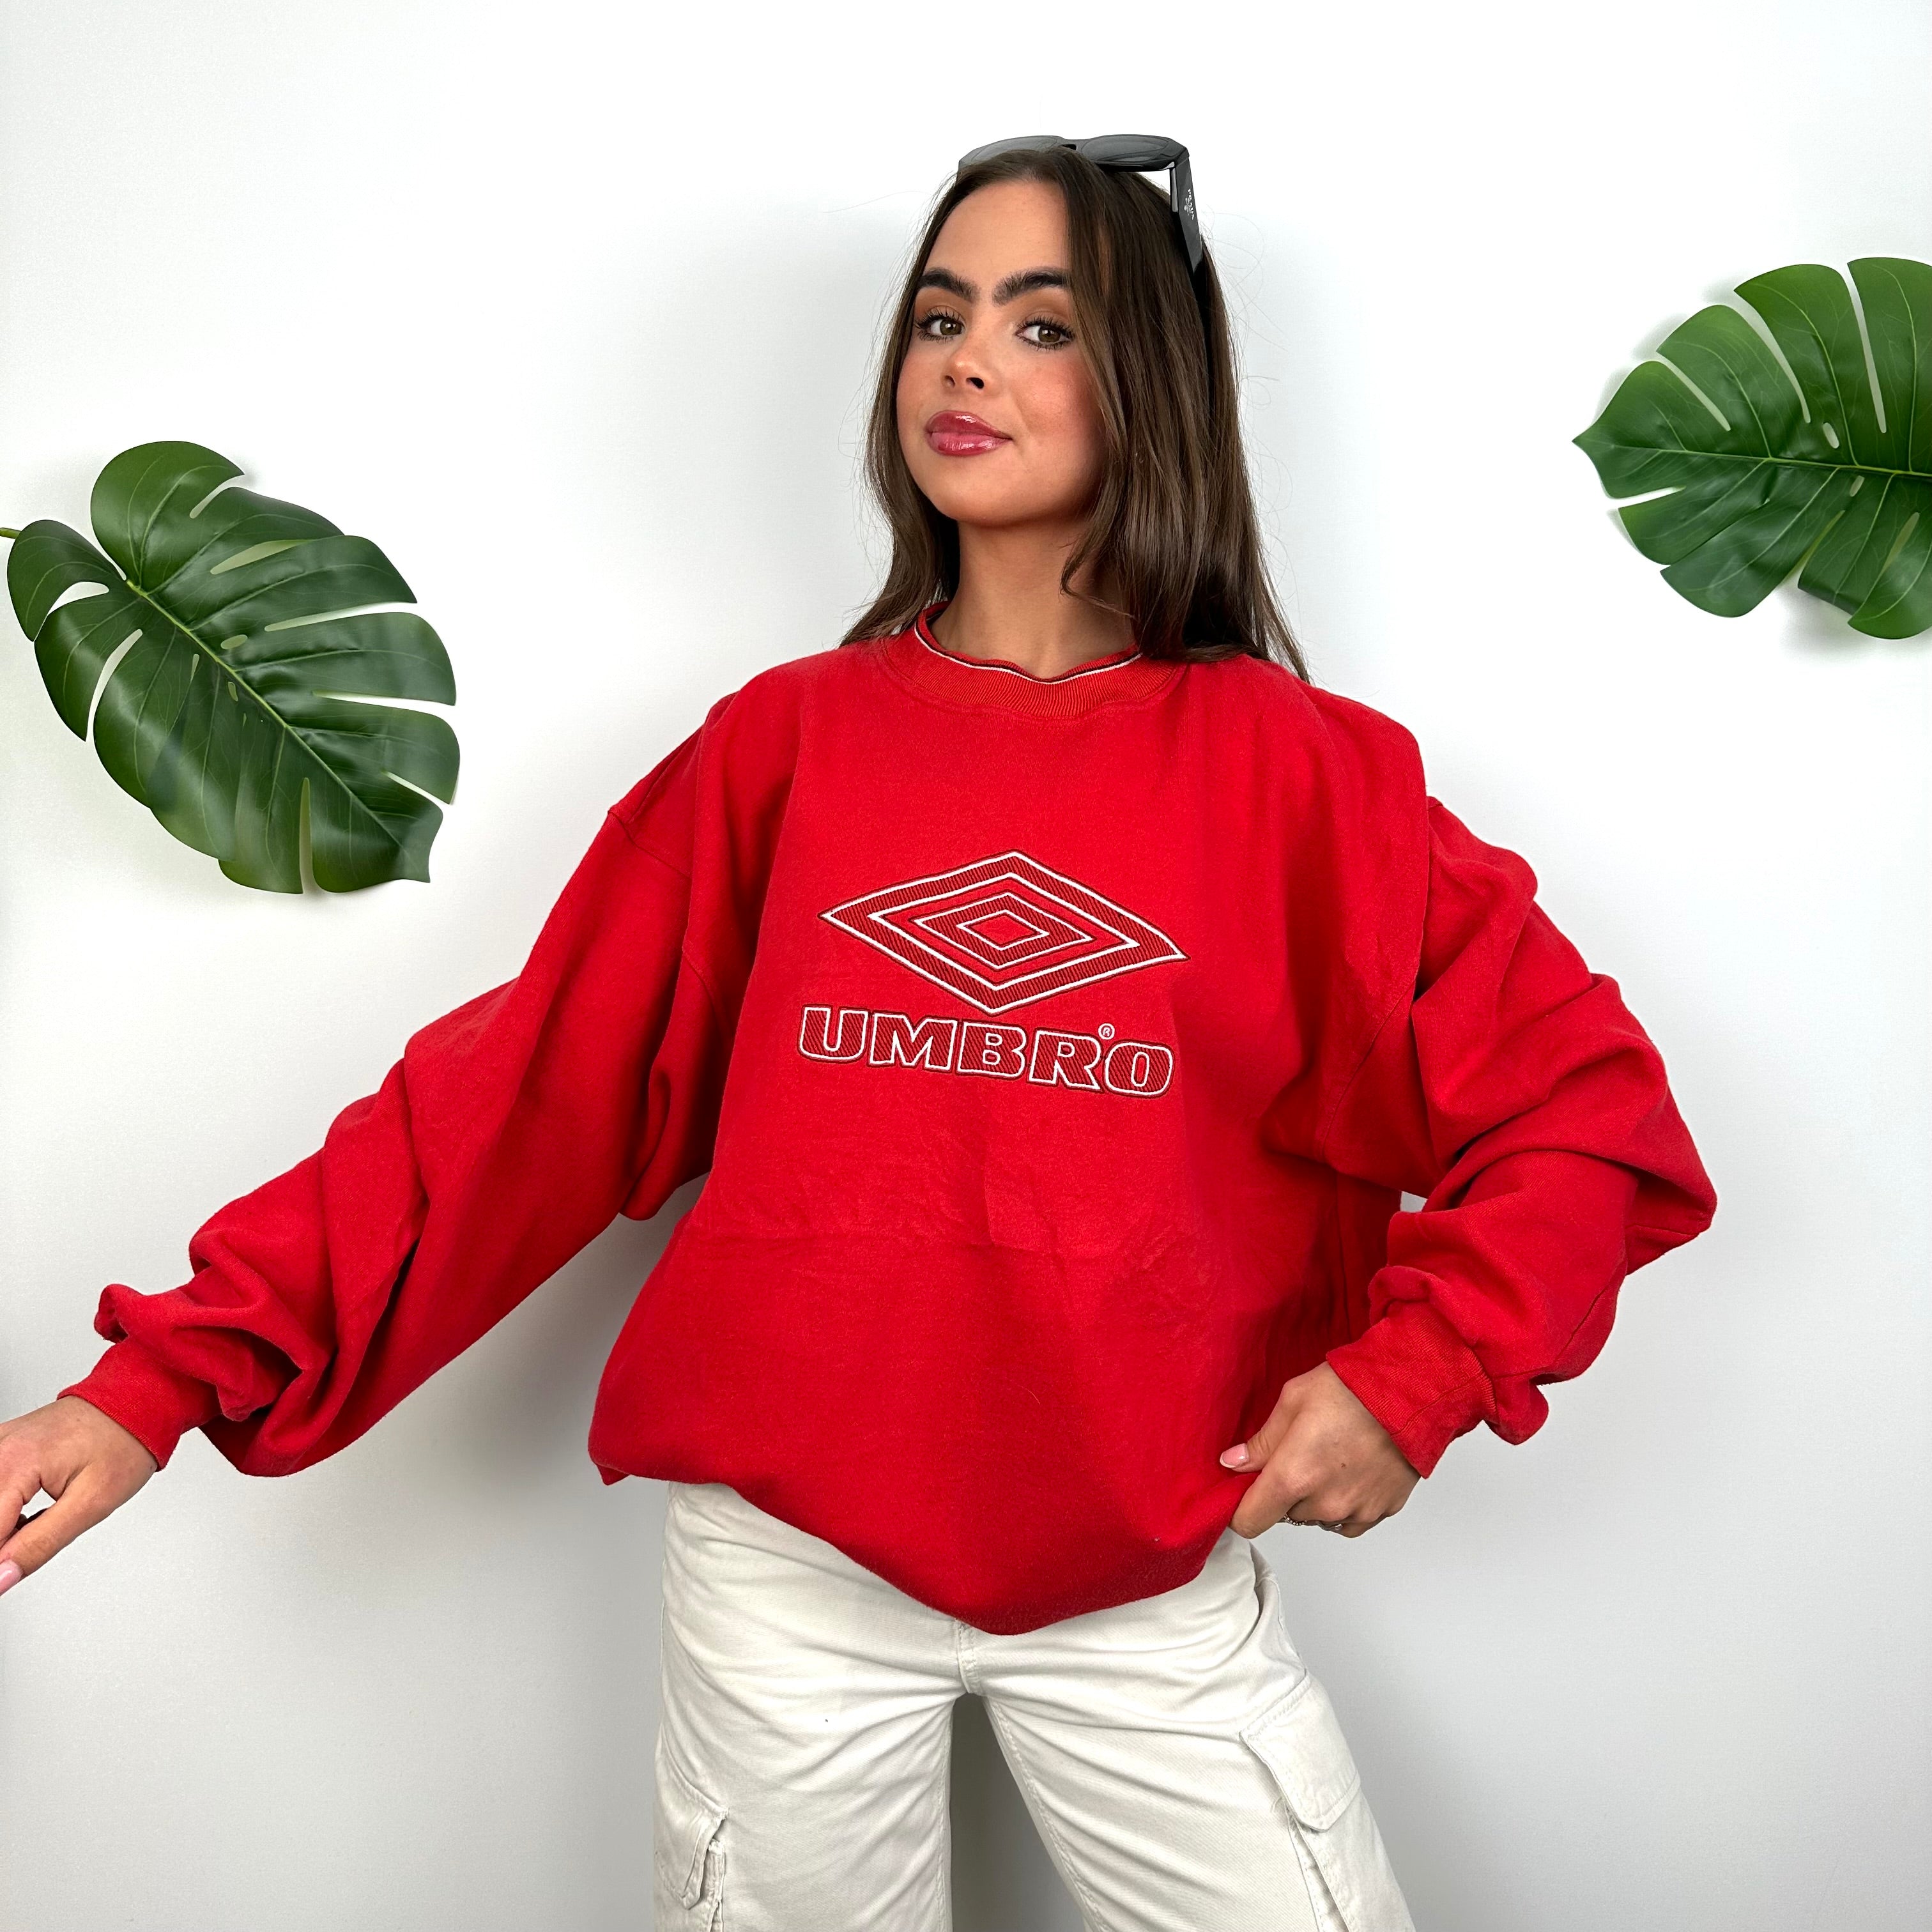 Umbro Red Embroidered Spell Out Sweatshirt (L)